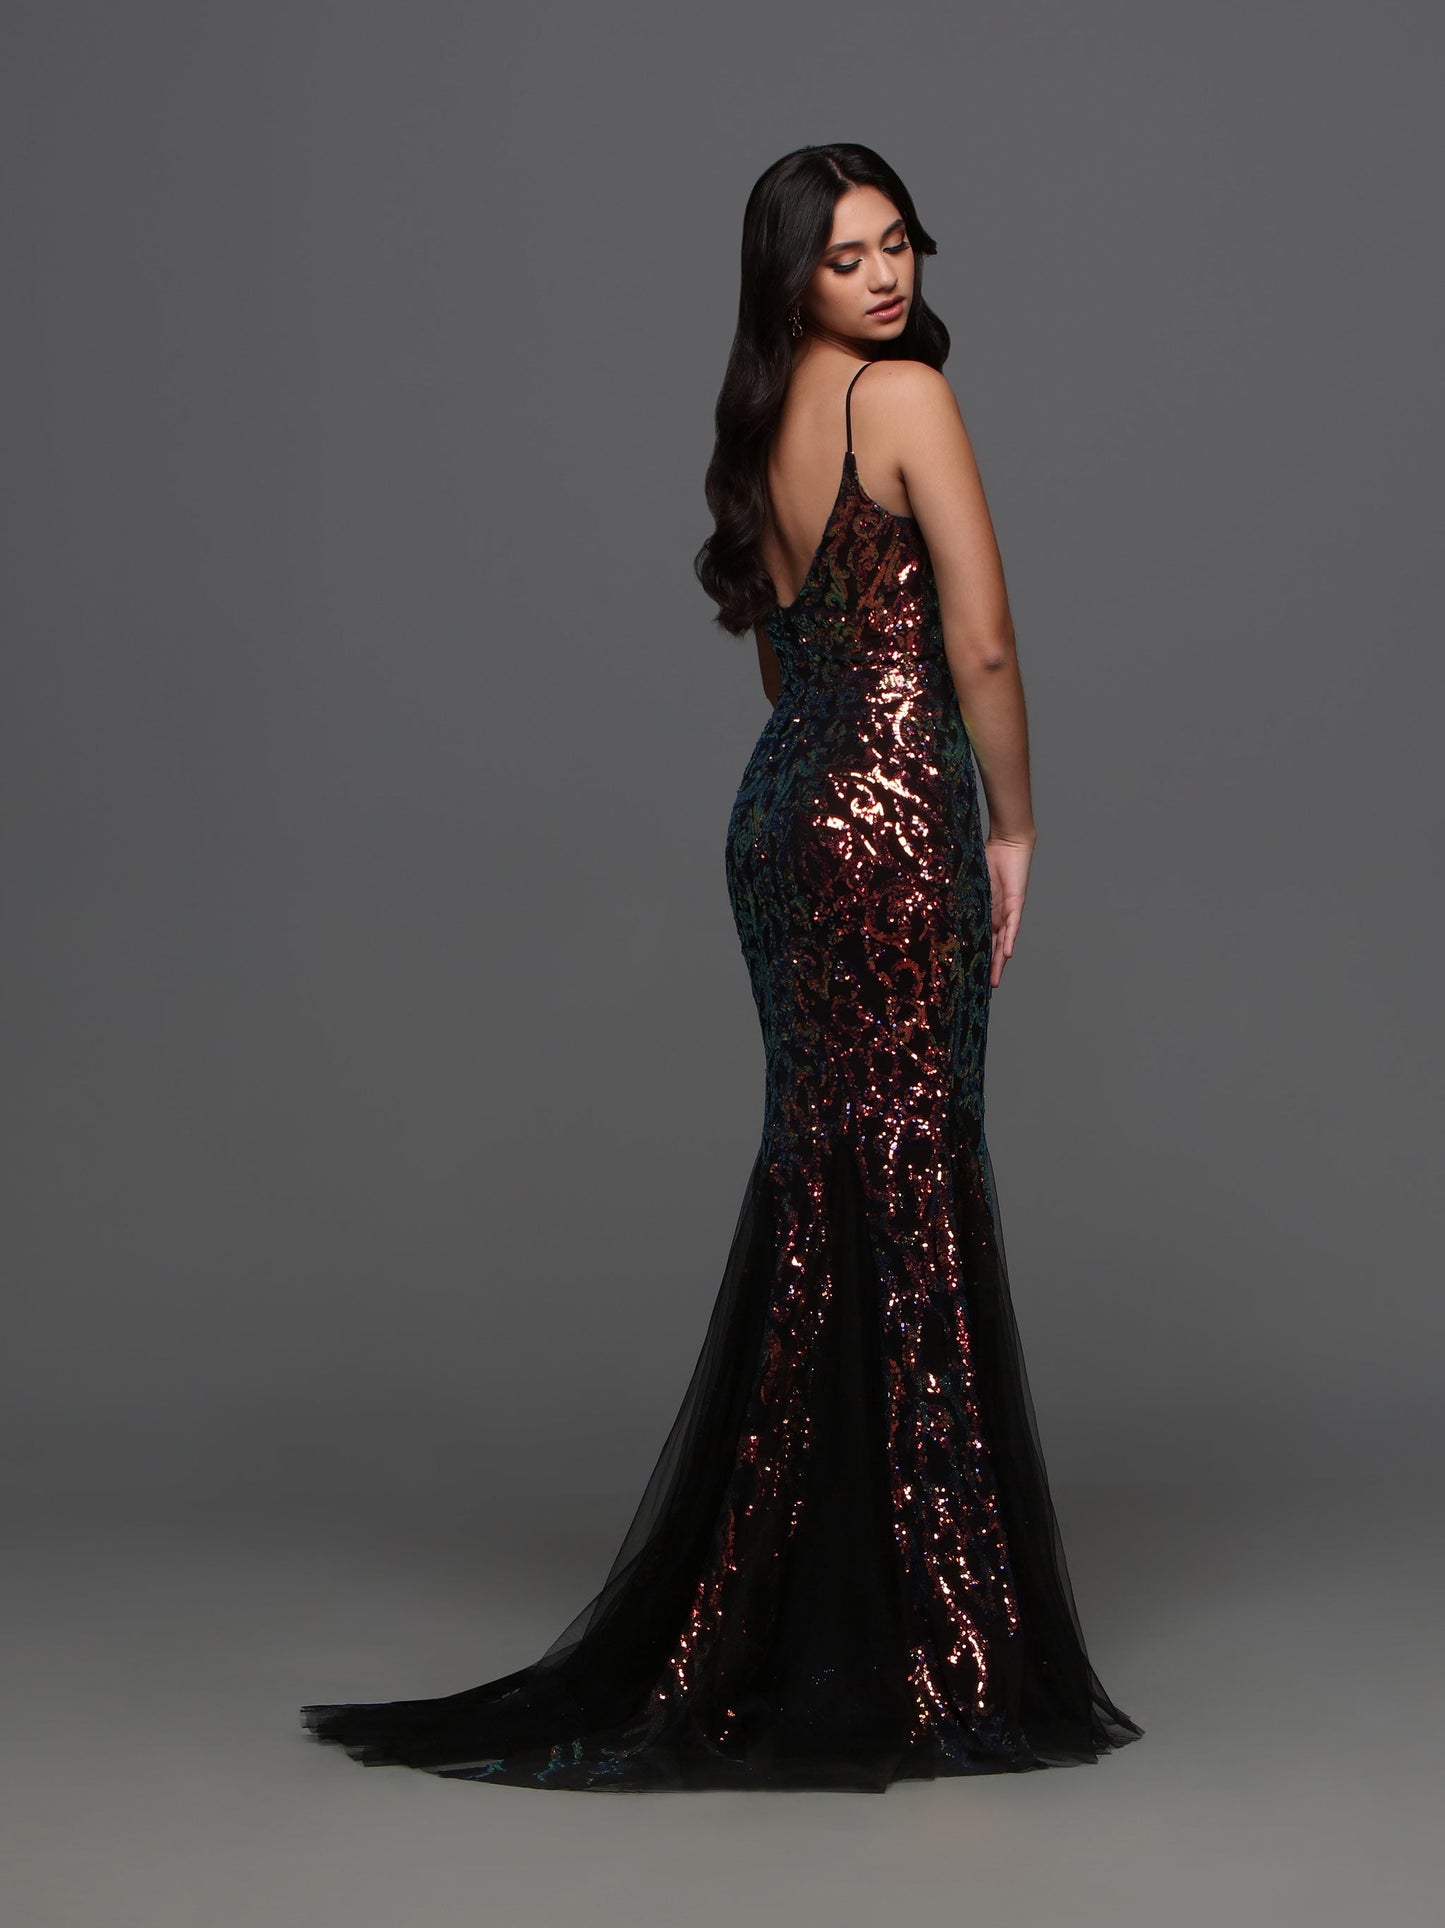 Crafted by designer Candice Wang 72338, this stunning evening gown features a sheer corset top with intricate sequin detailing. The tulle gusset and mermaid trumpet skirt add a touch of elegance and sophistication to any formal event. Be the belle of the ball in style and comfort.  Sizes: 0-12  Colors: Black Magic, Hot Pink